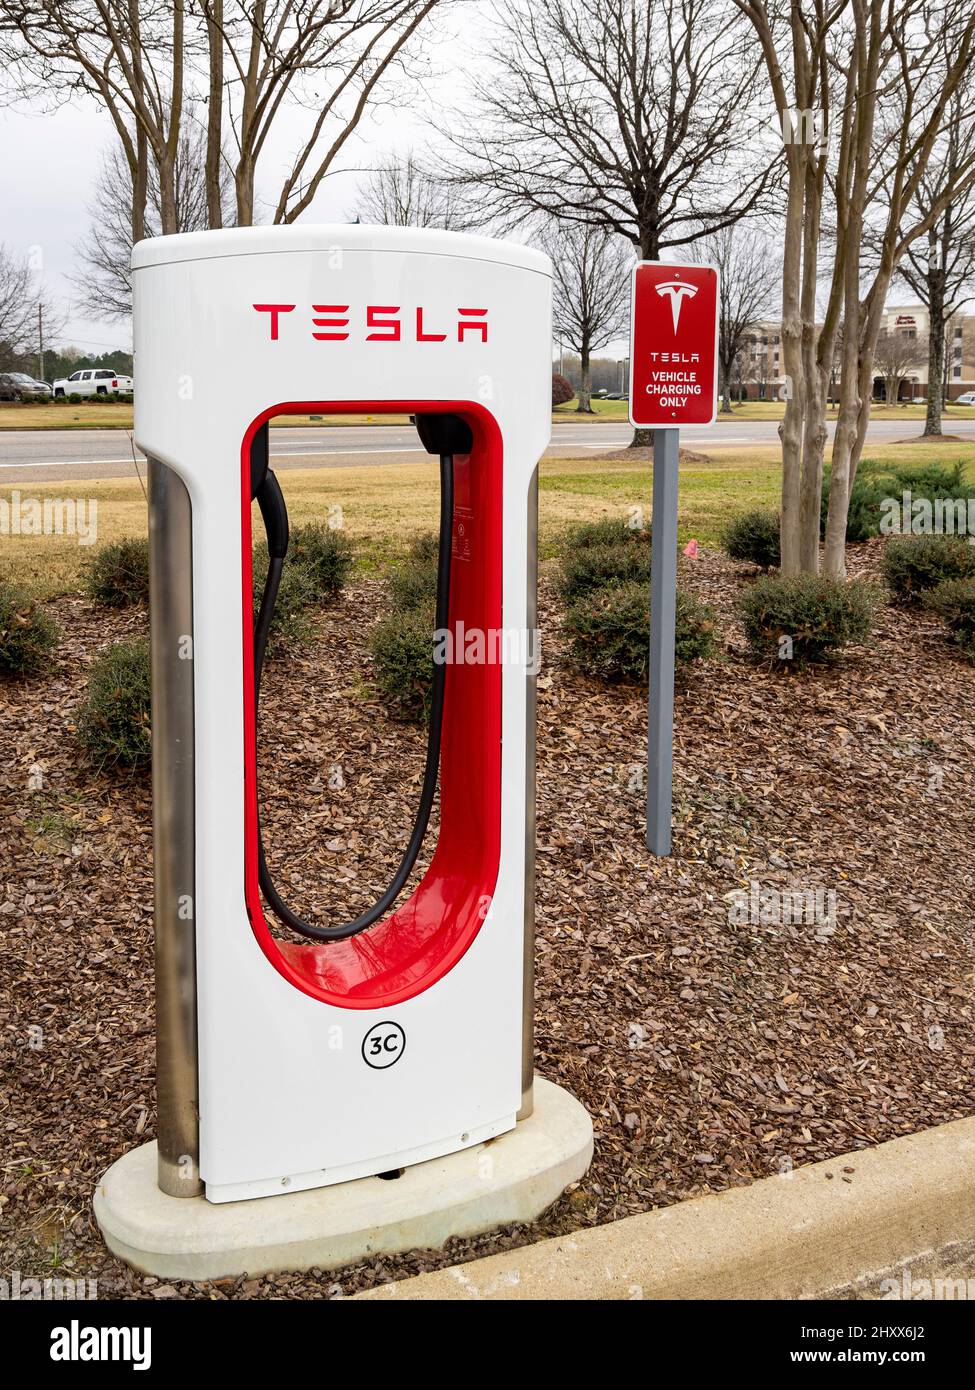 Tesla electric vehicle charging station, in a Target store parking lot, in Montgomery, Alabama USA. Stock Photo